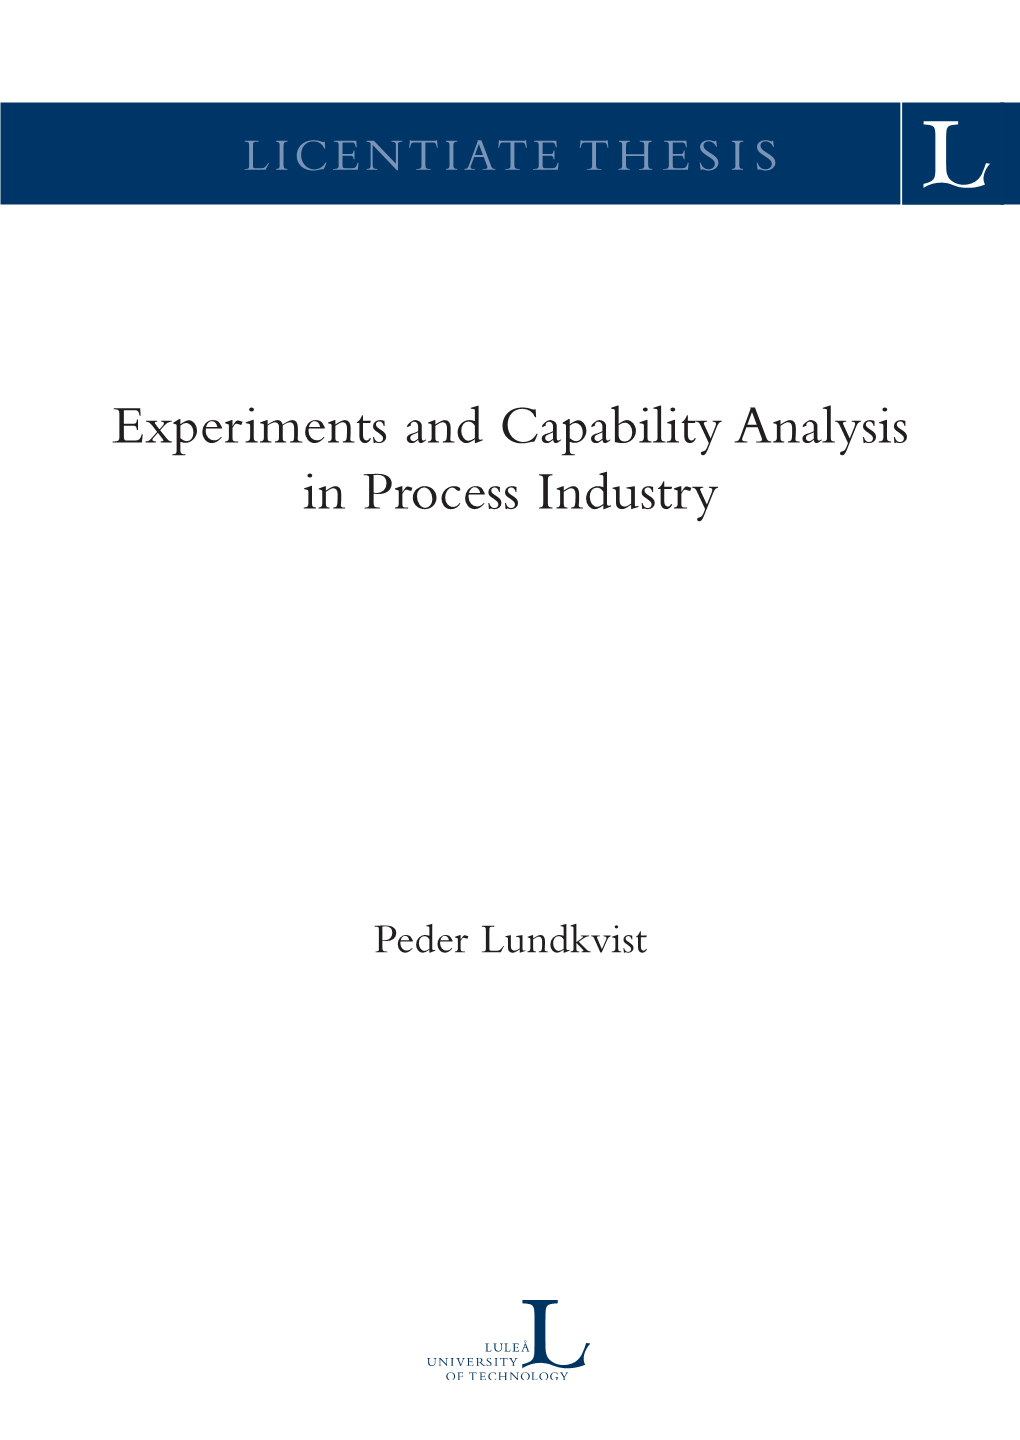 Experiments and Capability Analysis in Process Industry